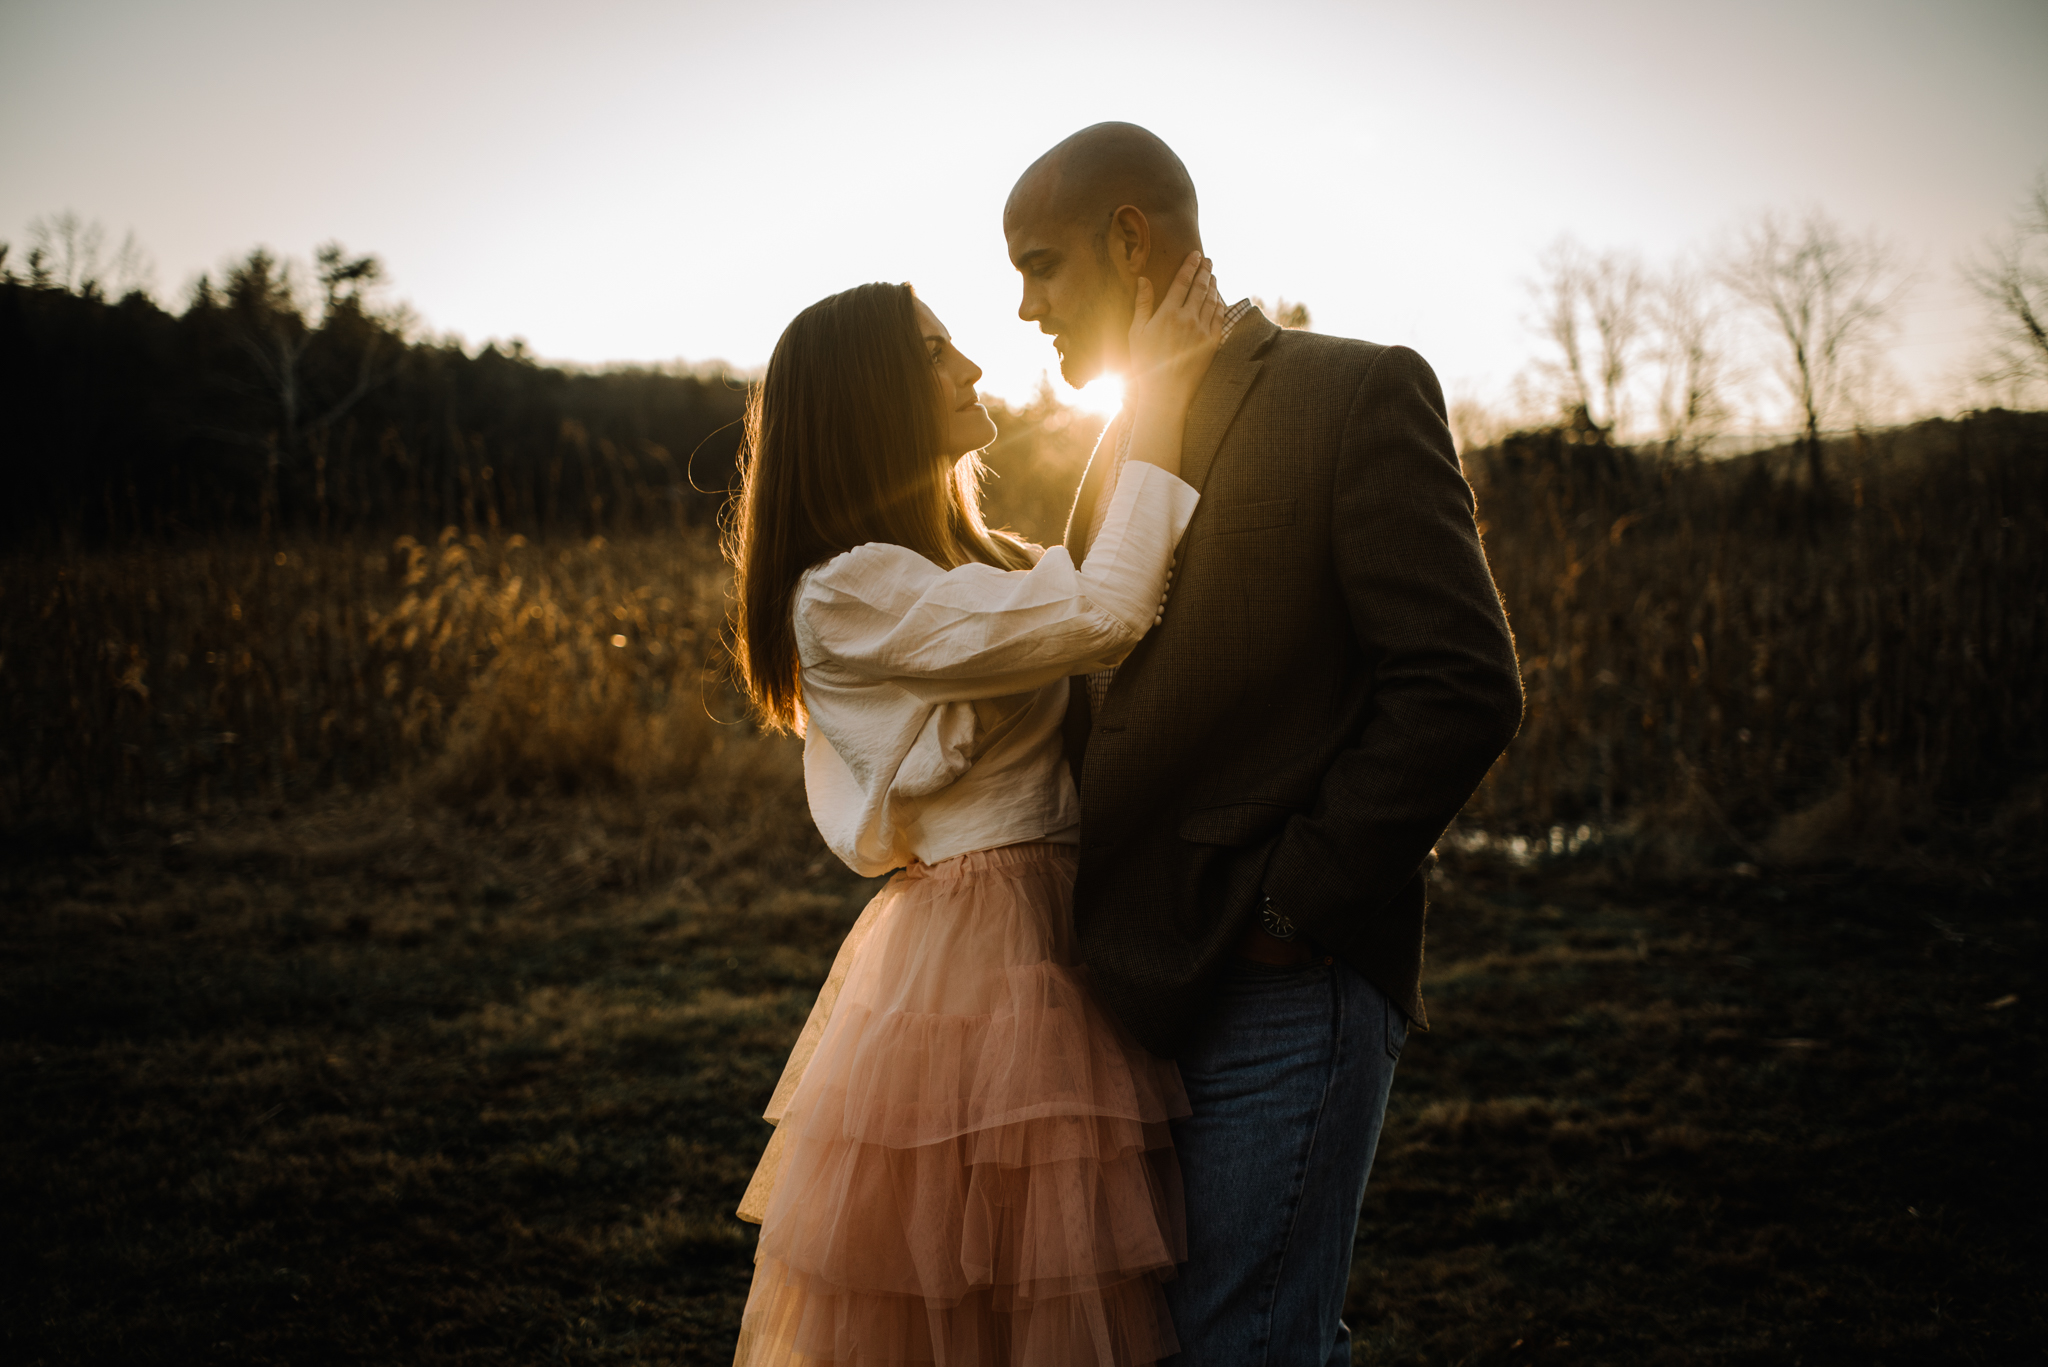 Emily and Hoyle - Shenandoah Valley Engagement Session - Winter Sunset - Downtown Old Movie Theater - Back yard Virginia Farm Wedding_16.JPG